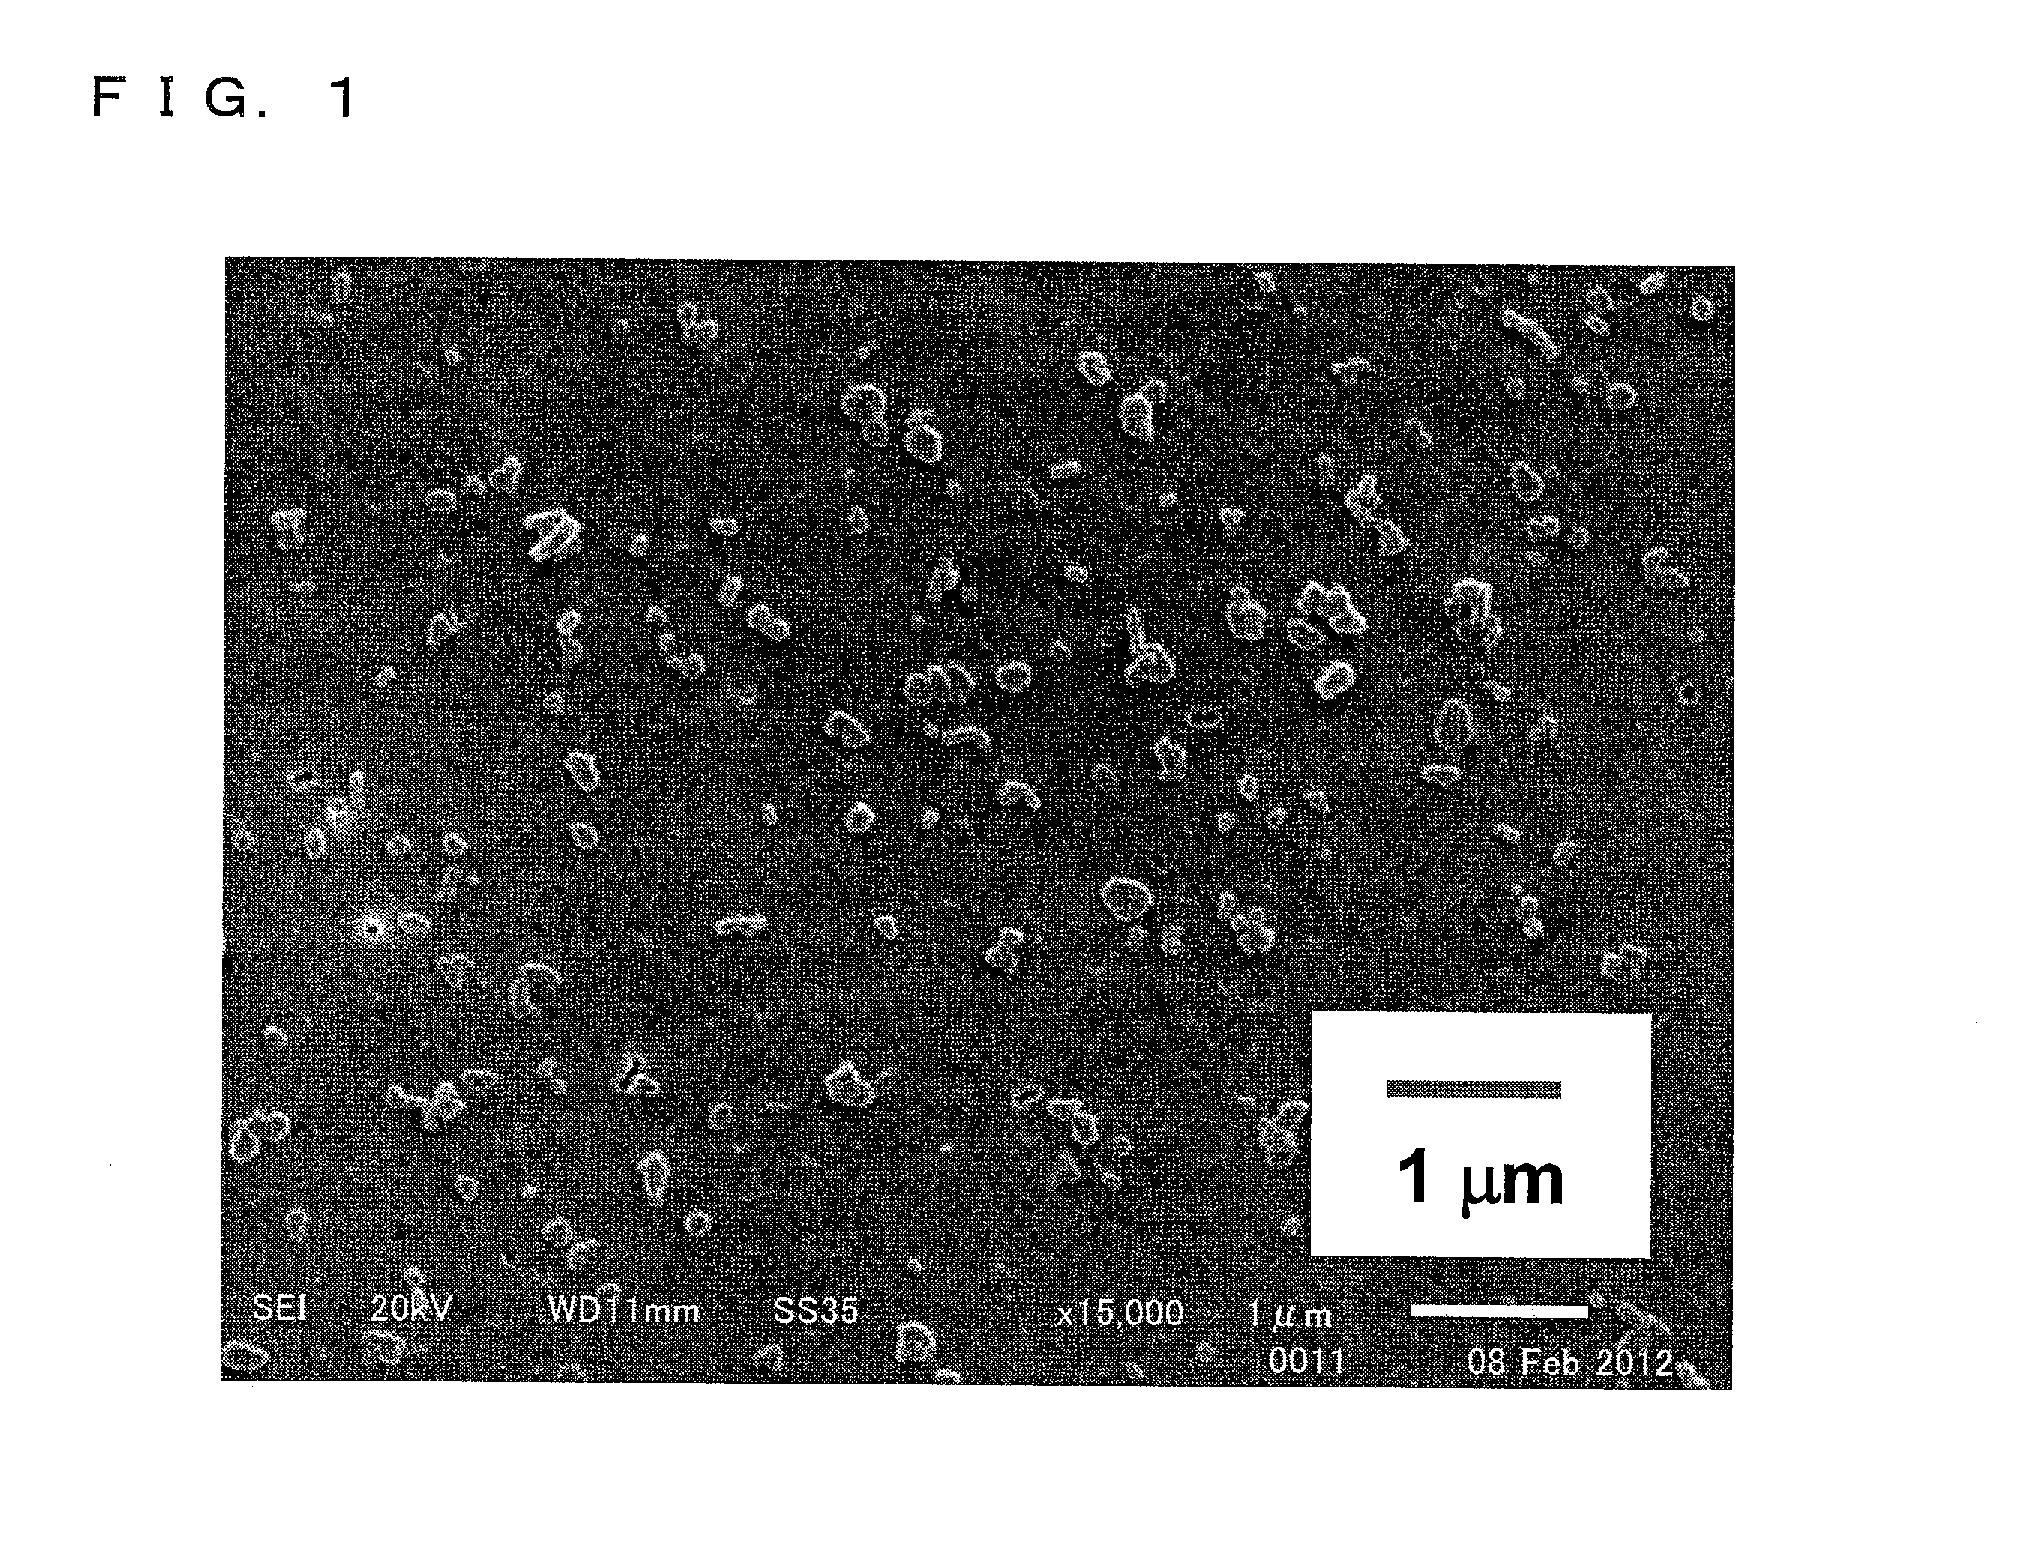 Method for producing an aqueous dispersion of drug nanoparticles and use thereof